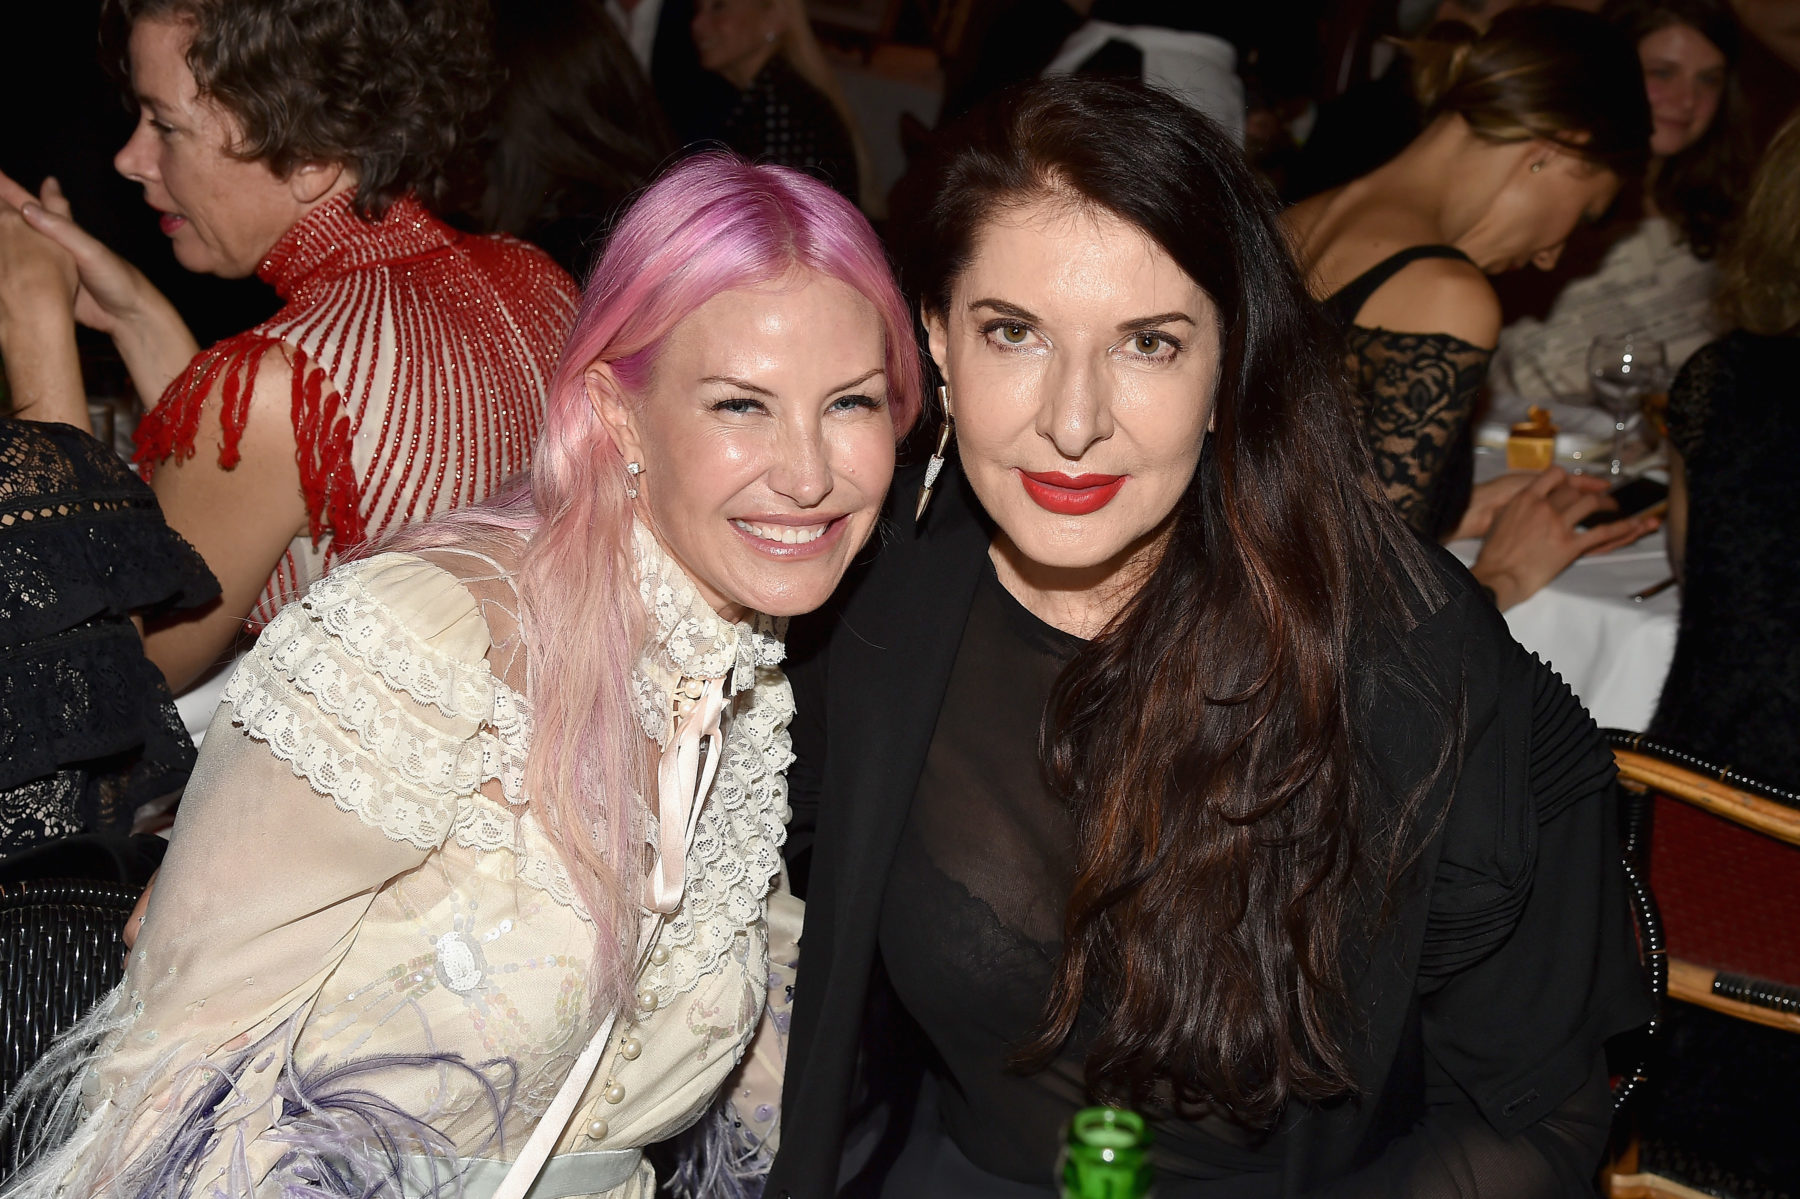 Two women sit at a table at the annual New York City dinner posing for a photo. The woman on the right has pastel pink hair and wears a white dress with lace and ribbon. The woman on the right is artist, Marina Abramovic. Marina has long dark brunette hair and wears a sheer black top and bright red lipstick.